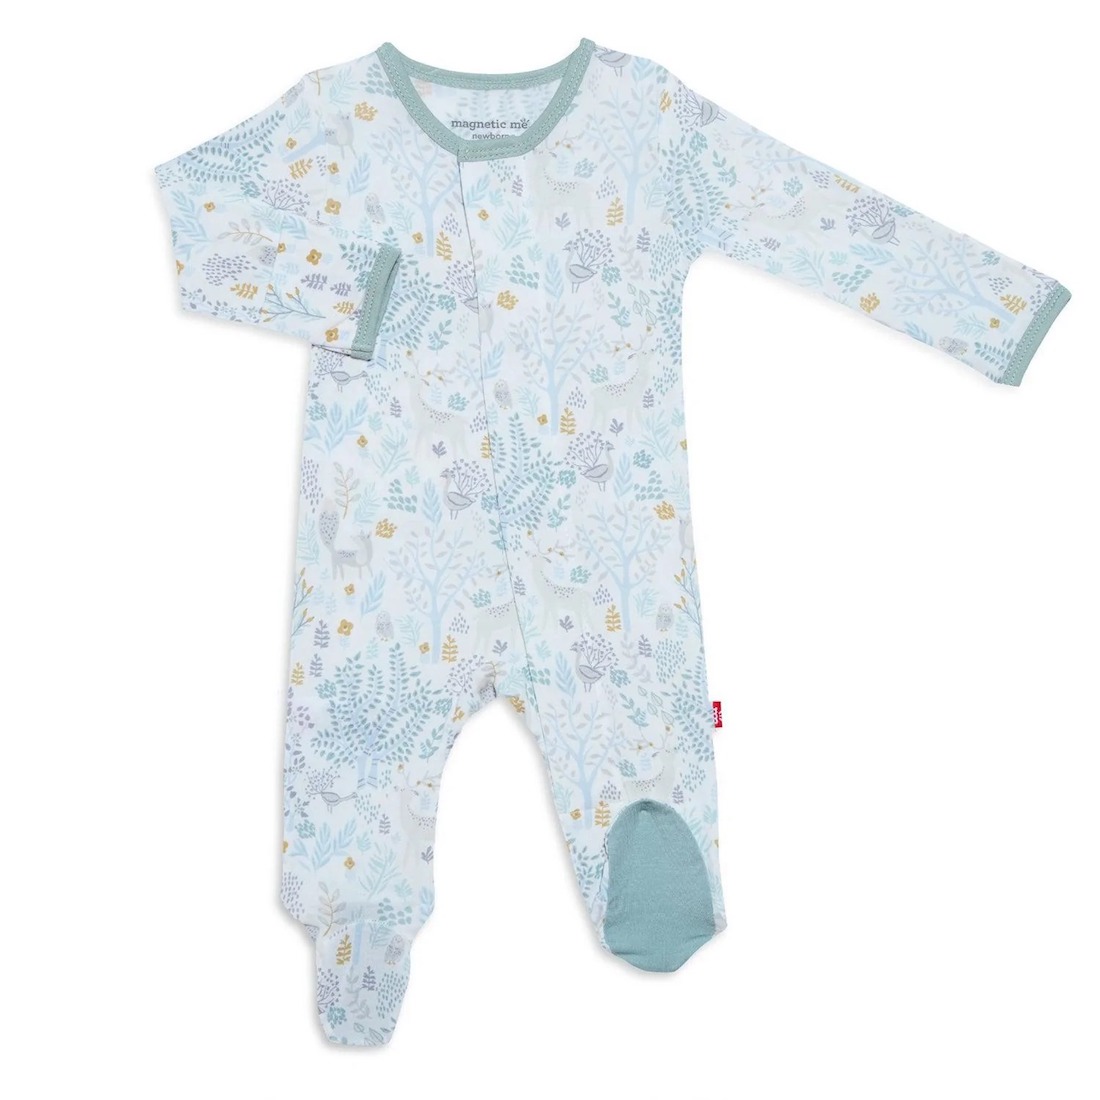 Magnetic Me imagine forest modal magnetic footie - 6-9 Months